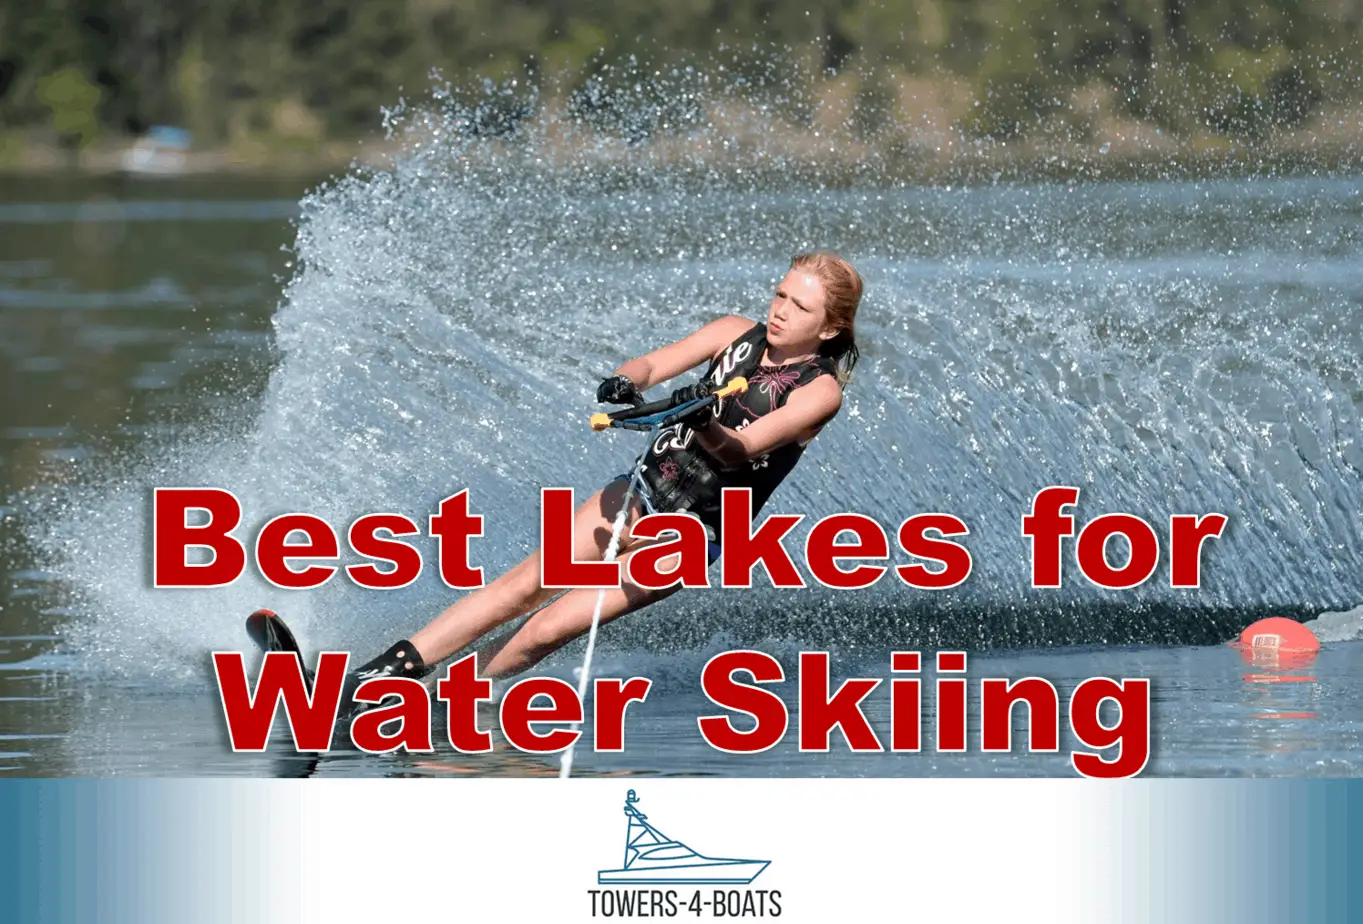 Best Lakes for Water Skiing